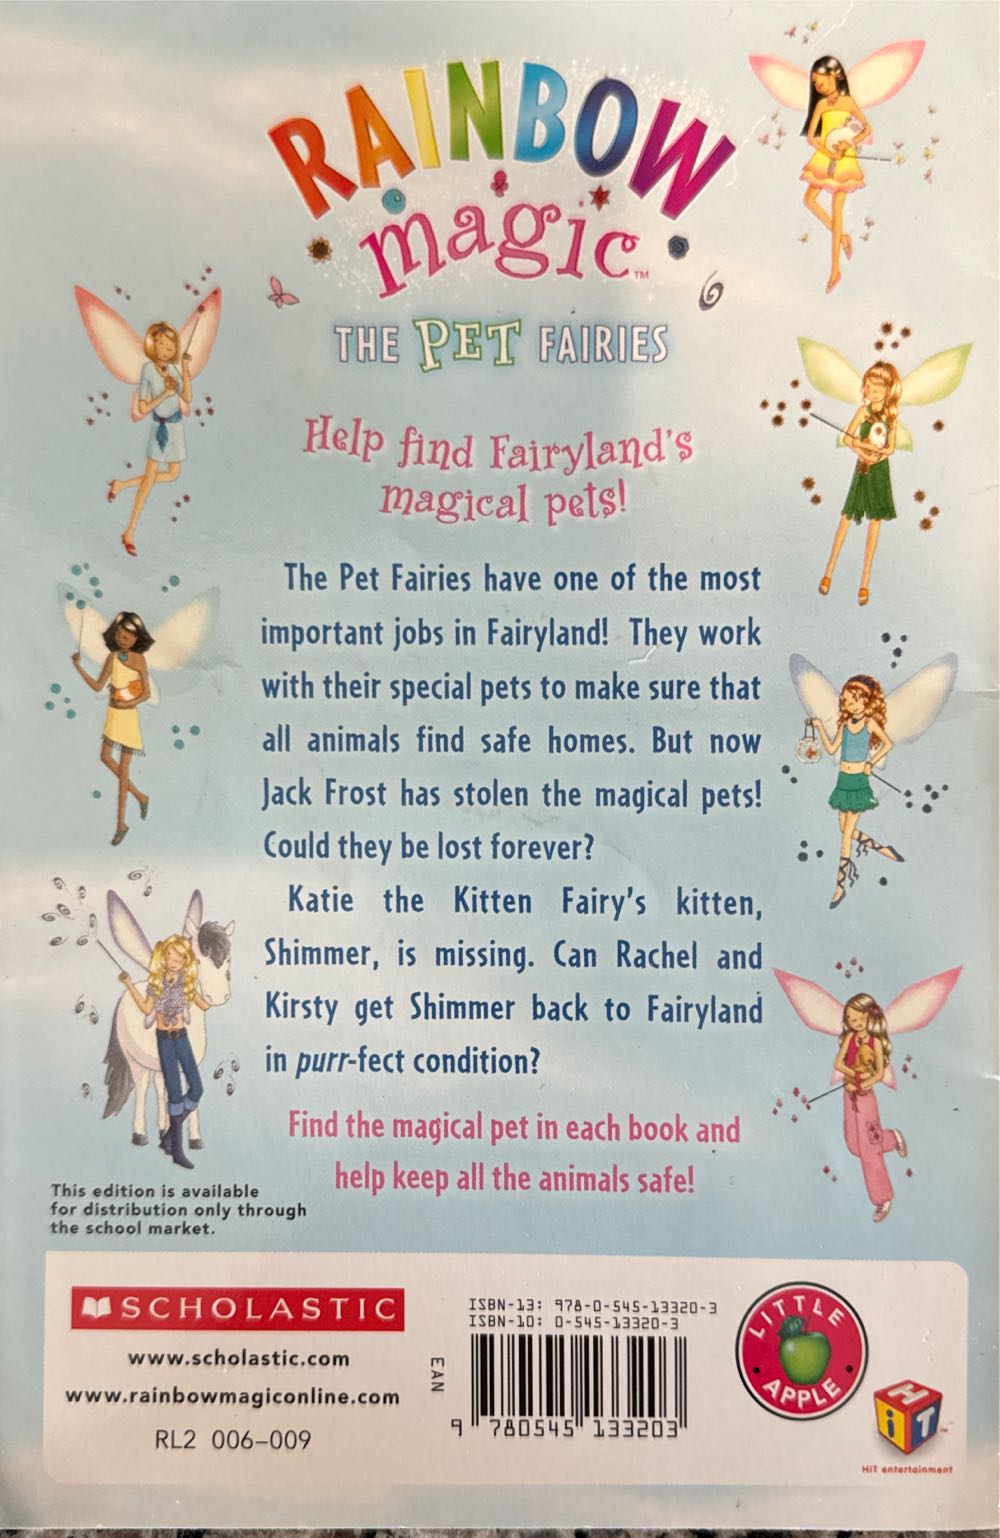 RM - Pet Fairies 1: Katie the Kitten Fairy - Daisy Meadows (Scholastic Inc. - Paperback) book collectible [Barcode 9780545133203] - Main Image 2